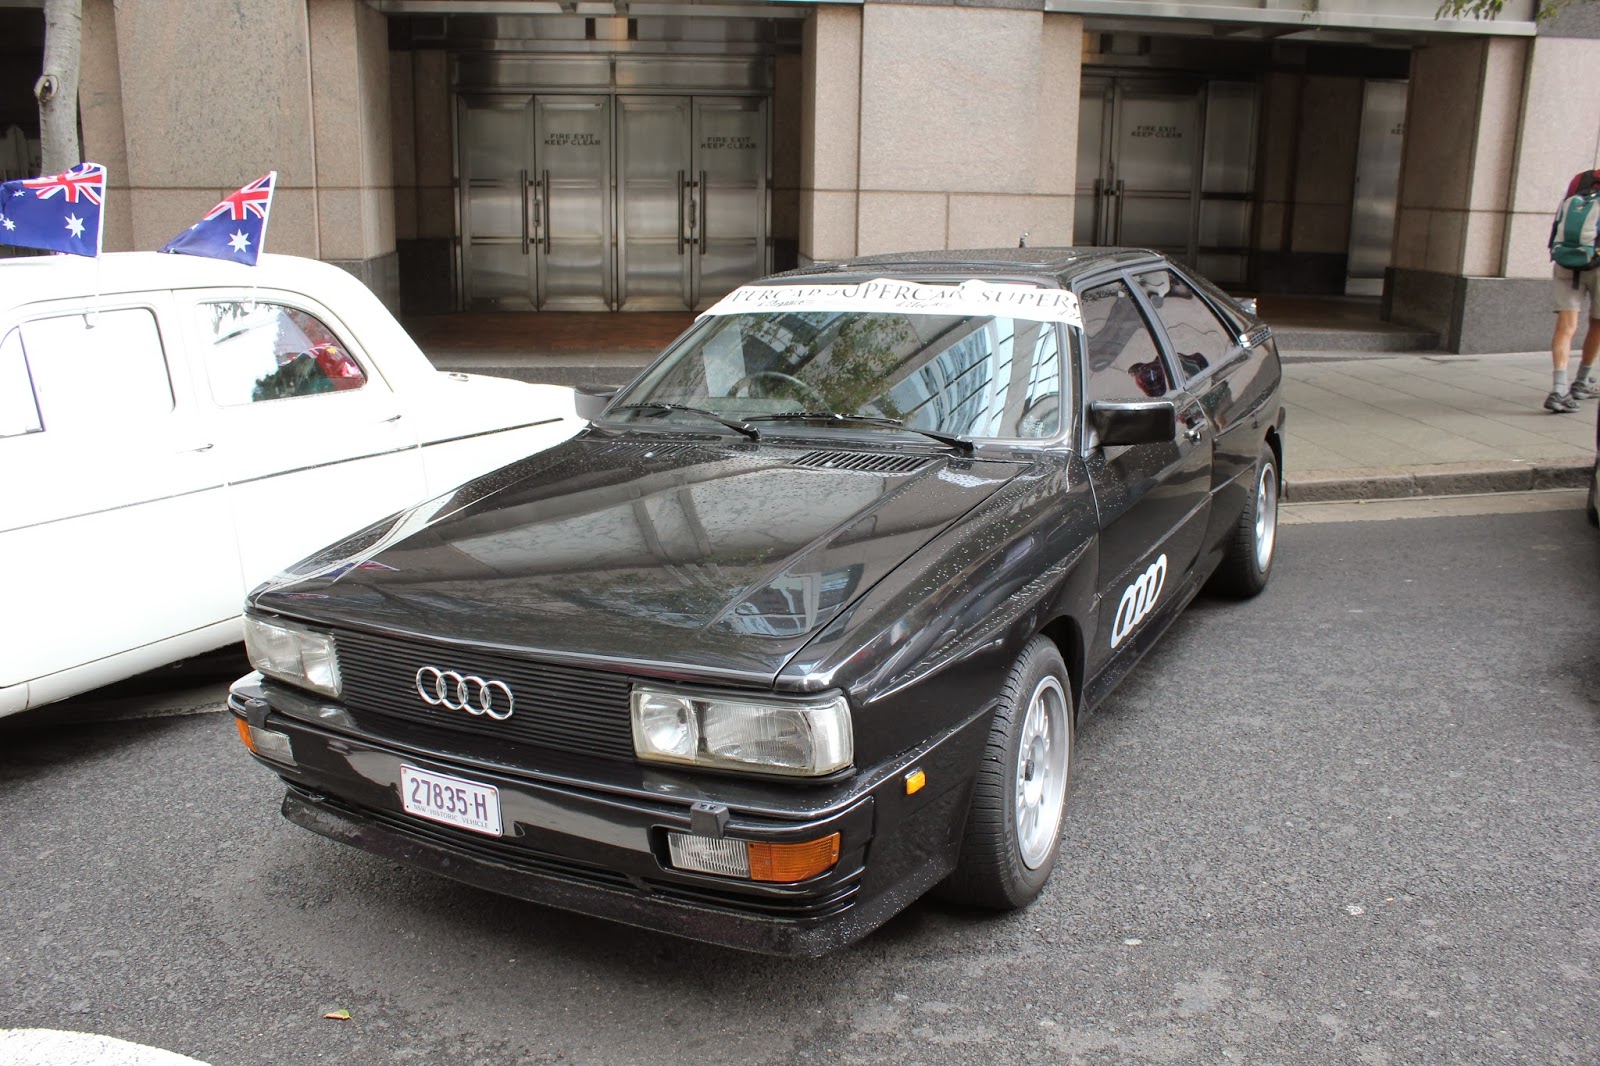 Aussie Old Parked Cars: 1983 Audi Quattro Coupe